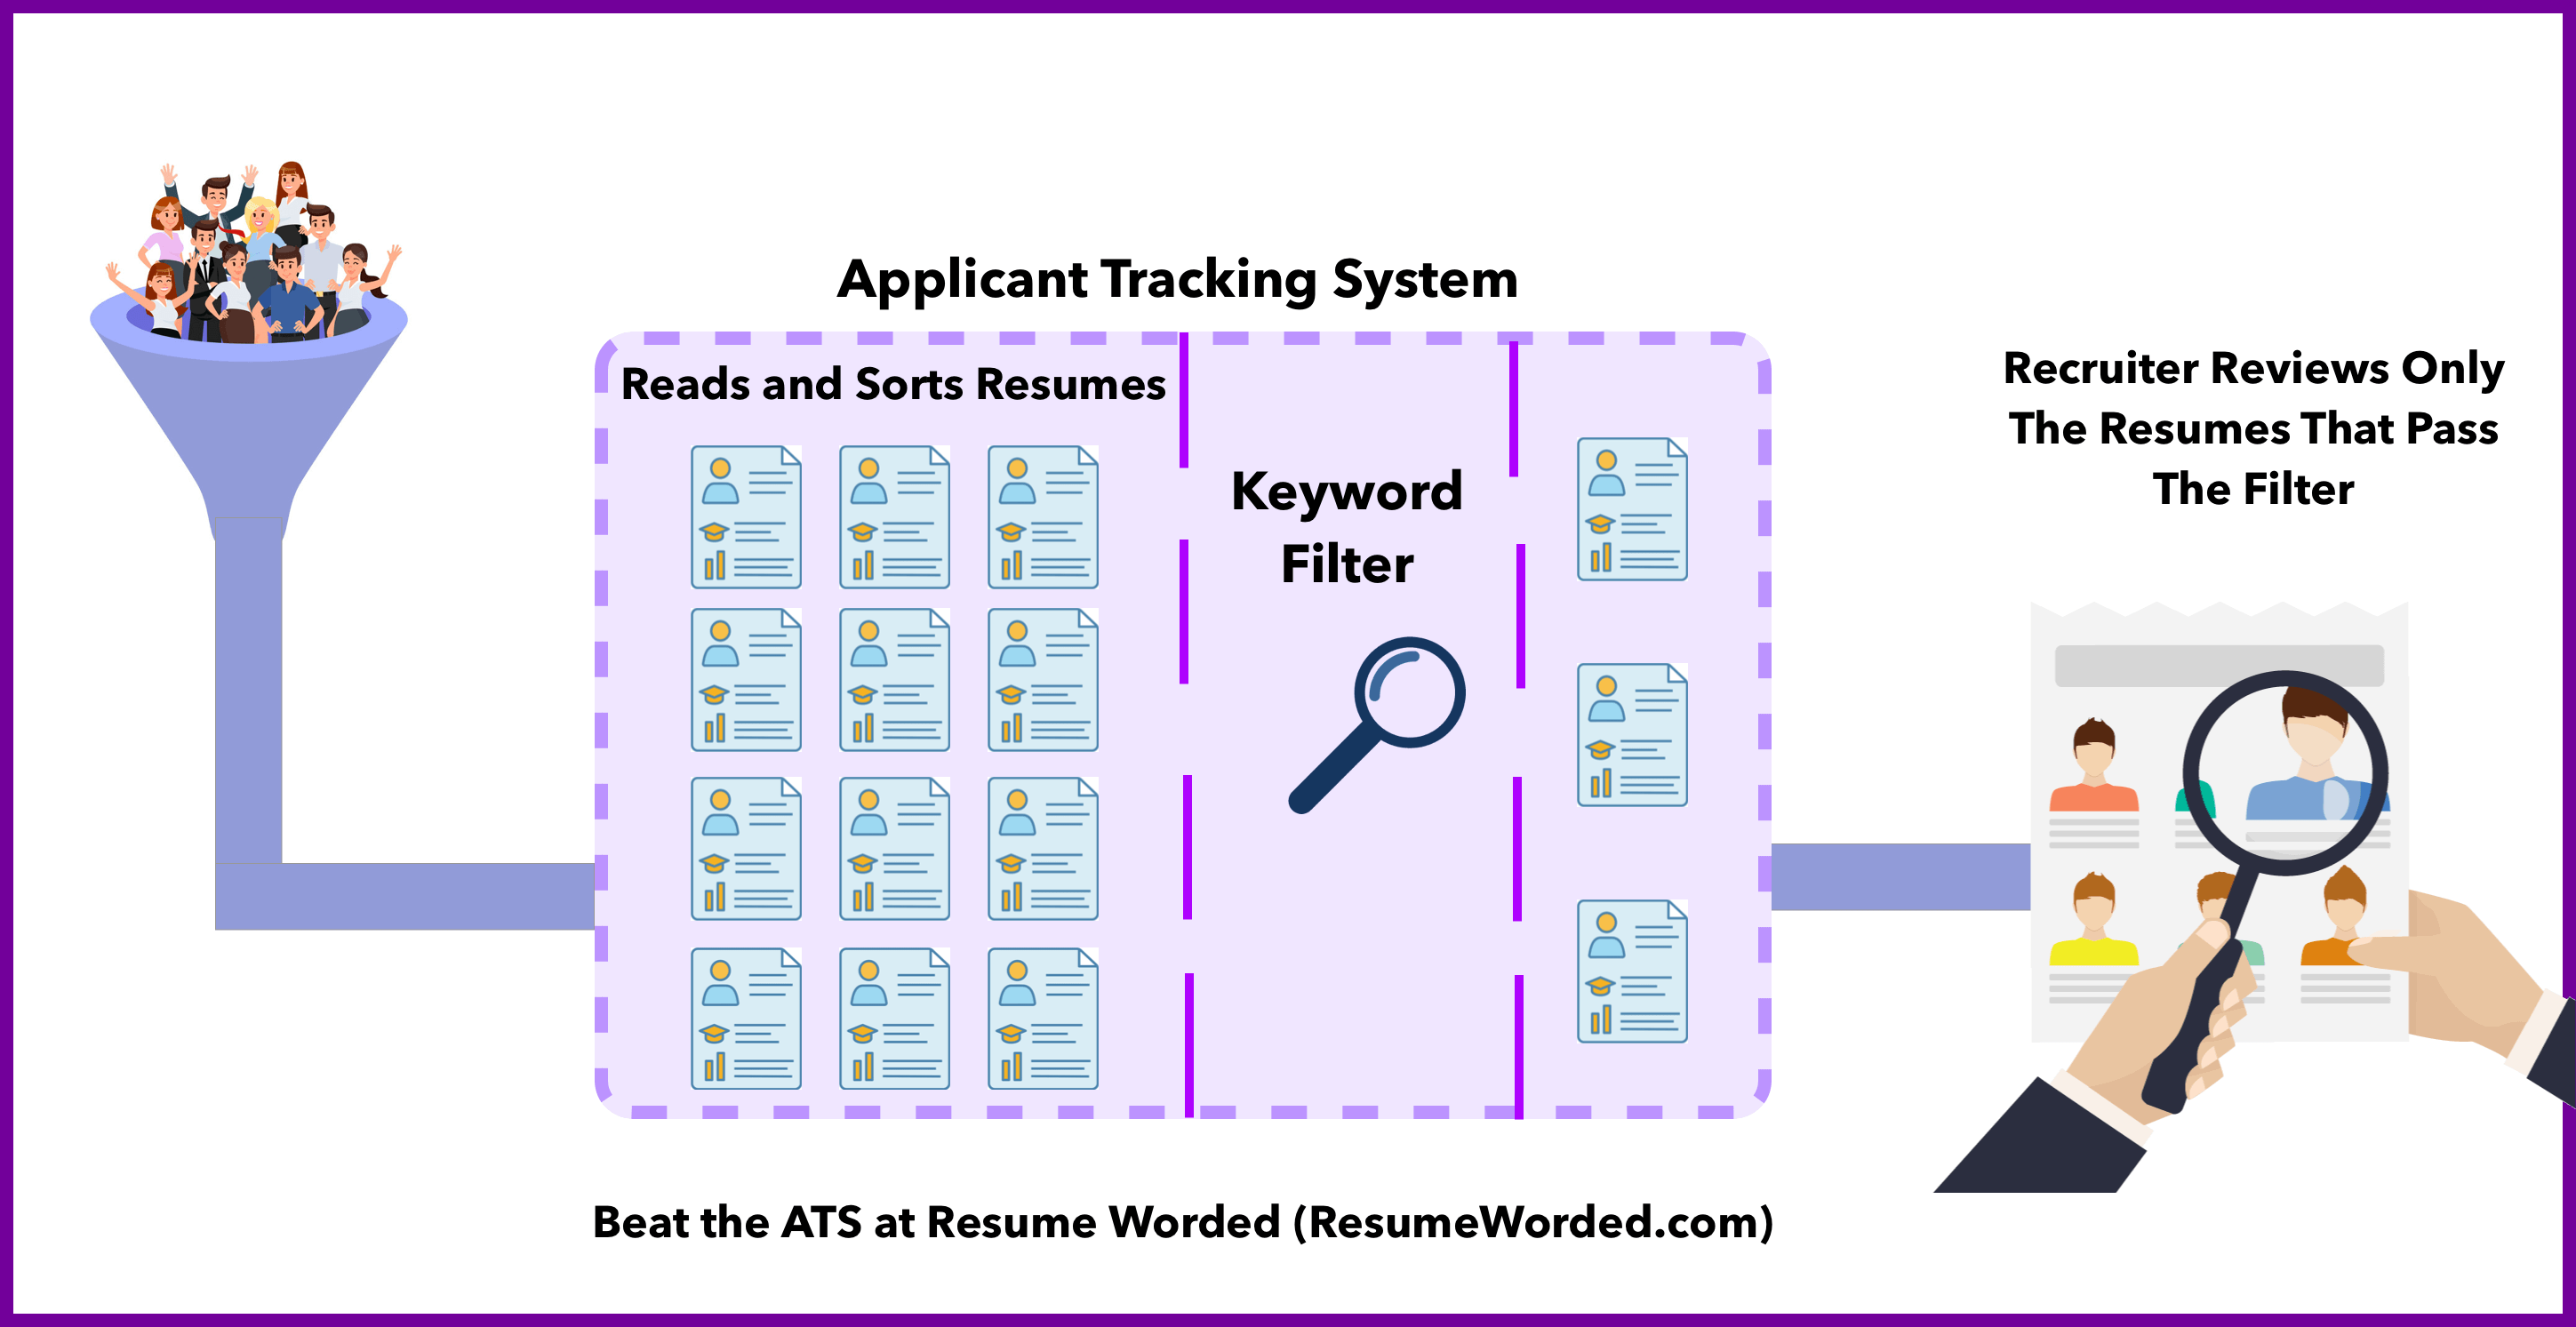 The Applicant Tracking System scans and filters out resumes that do not have the right keywords